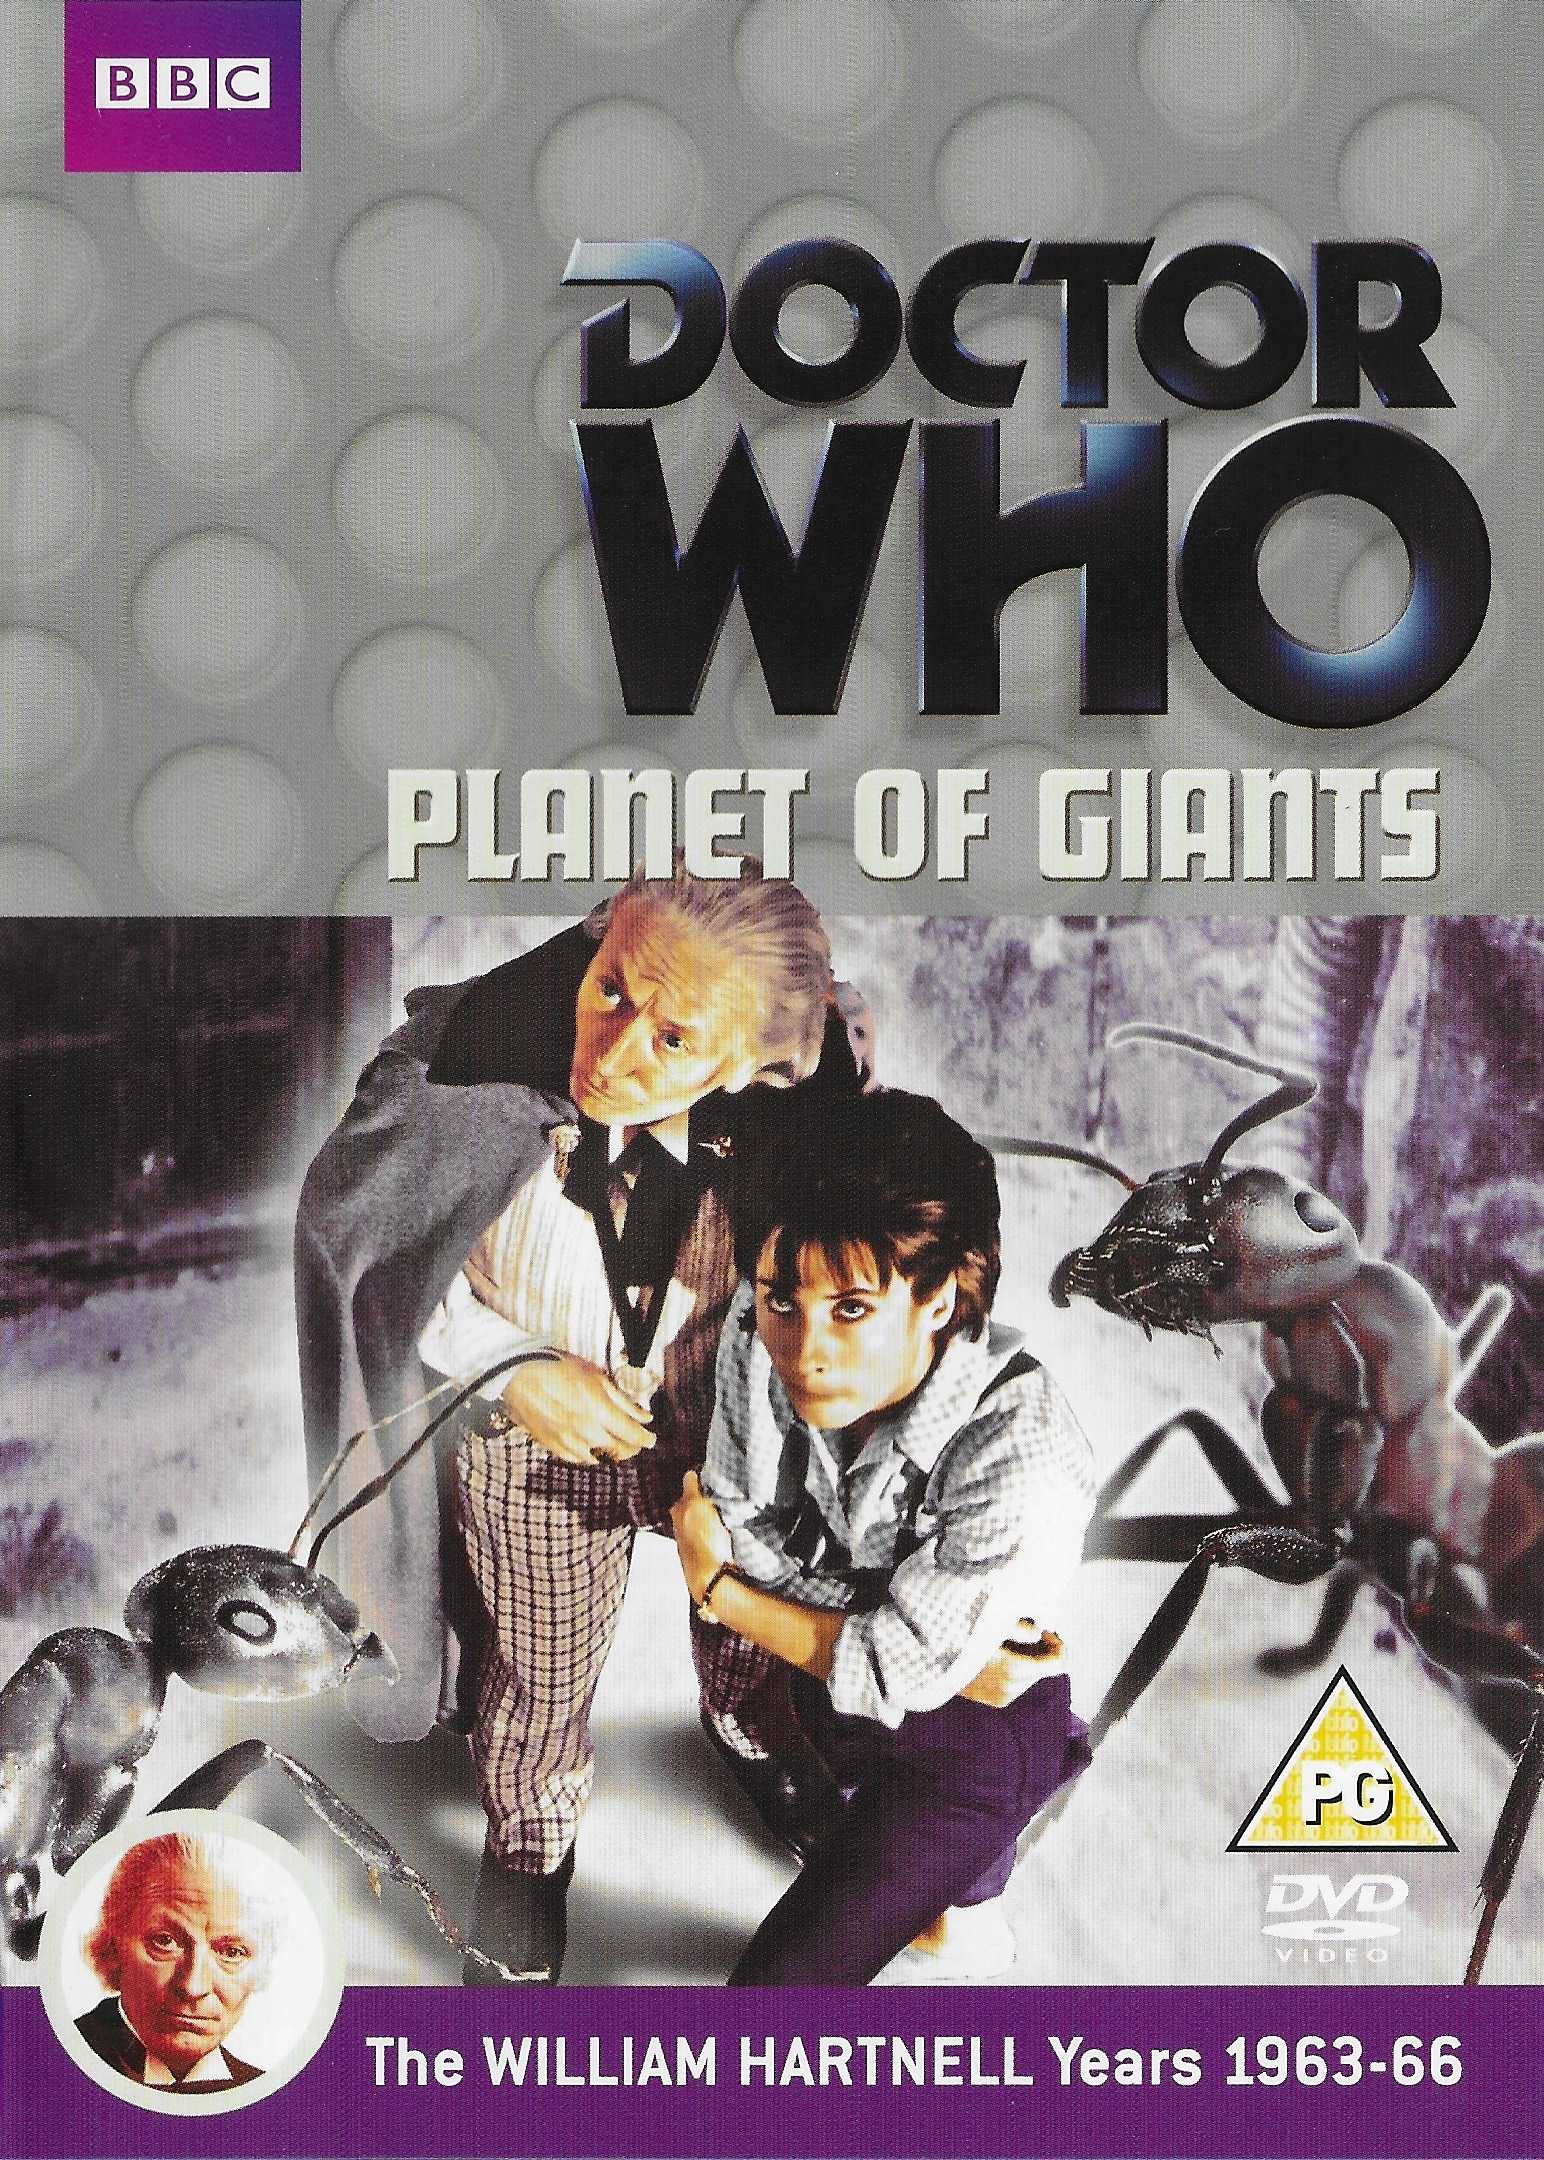 Picture of BBCDVD 3479 Doctor Who - Planet of giants by artist Louis Marks from the BBC dvds - Records and Tapes library